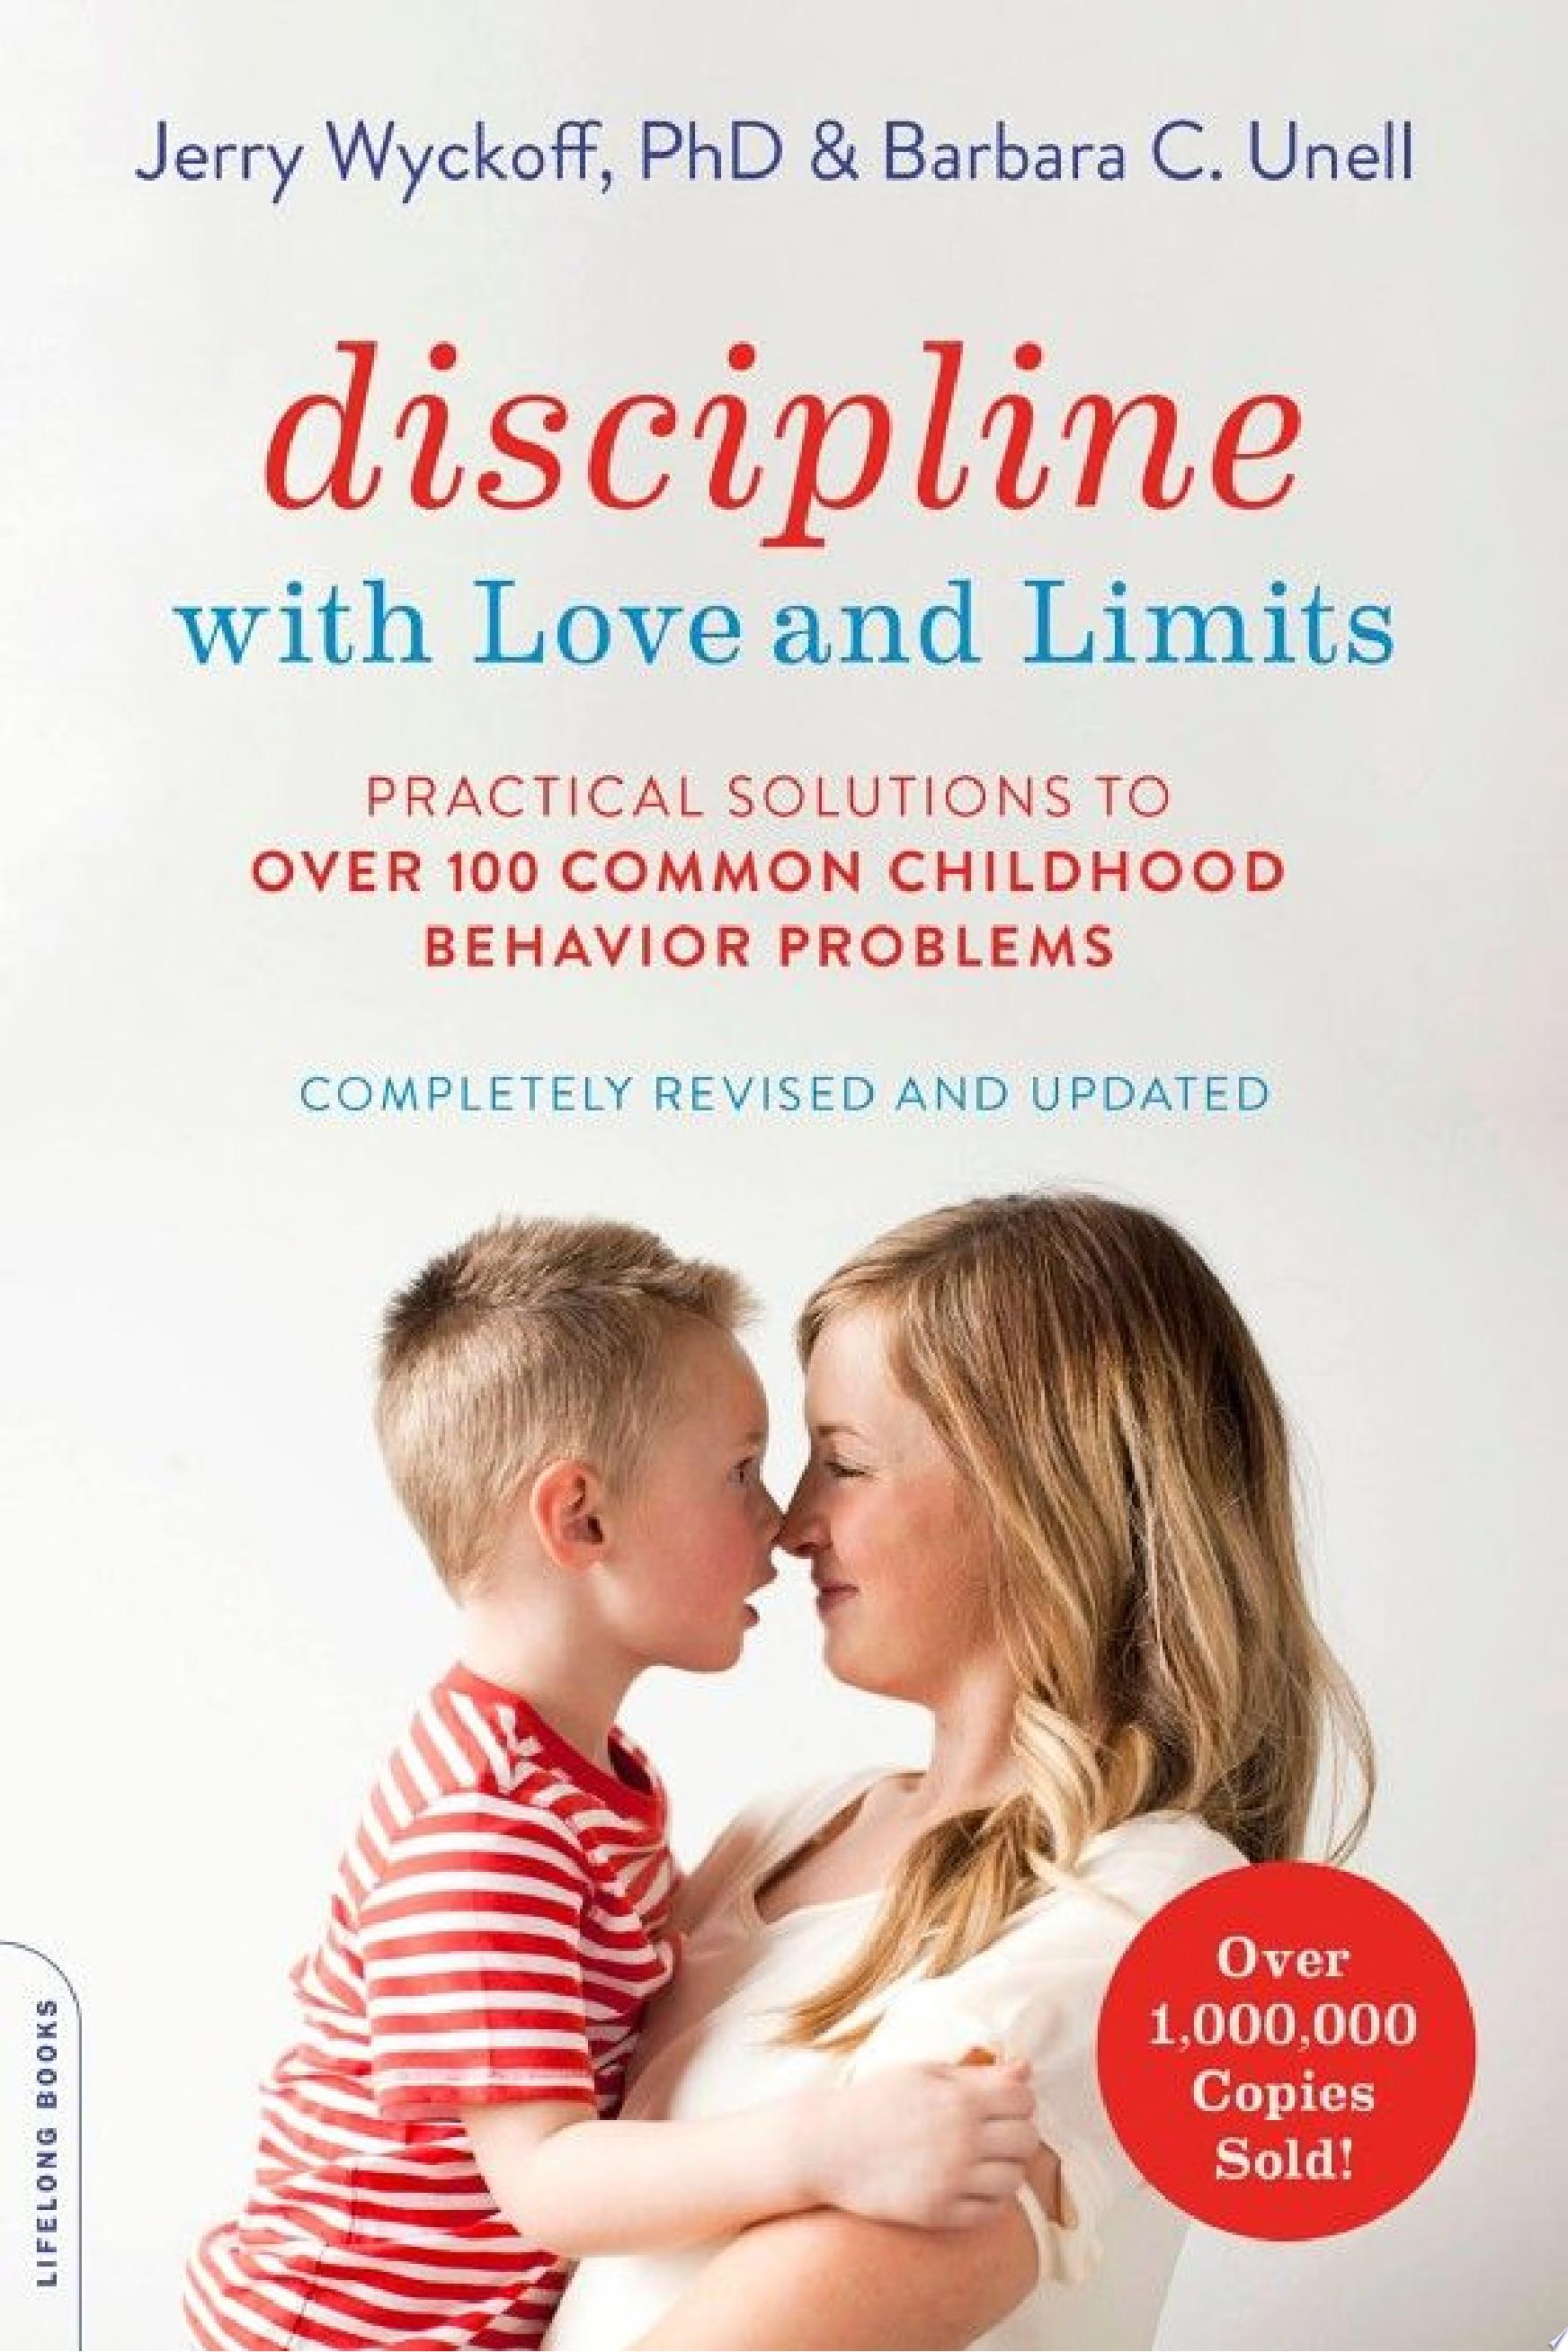 Image for "Discipline with Love and Limits"